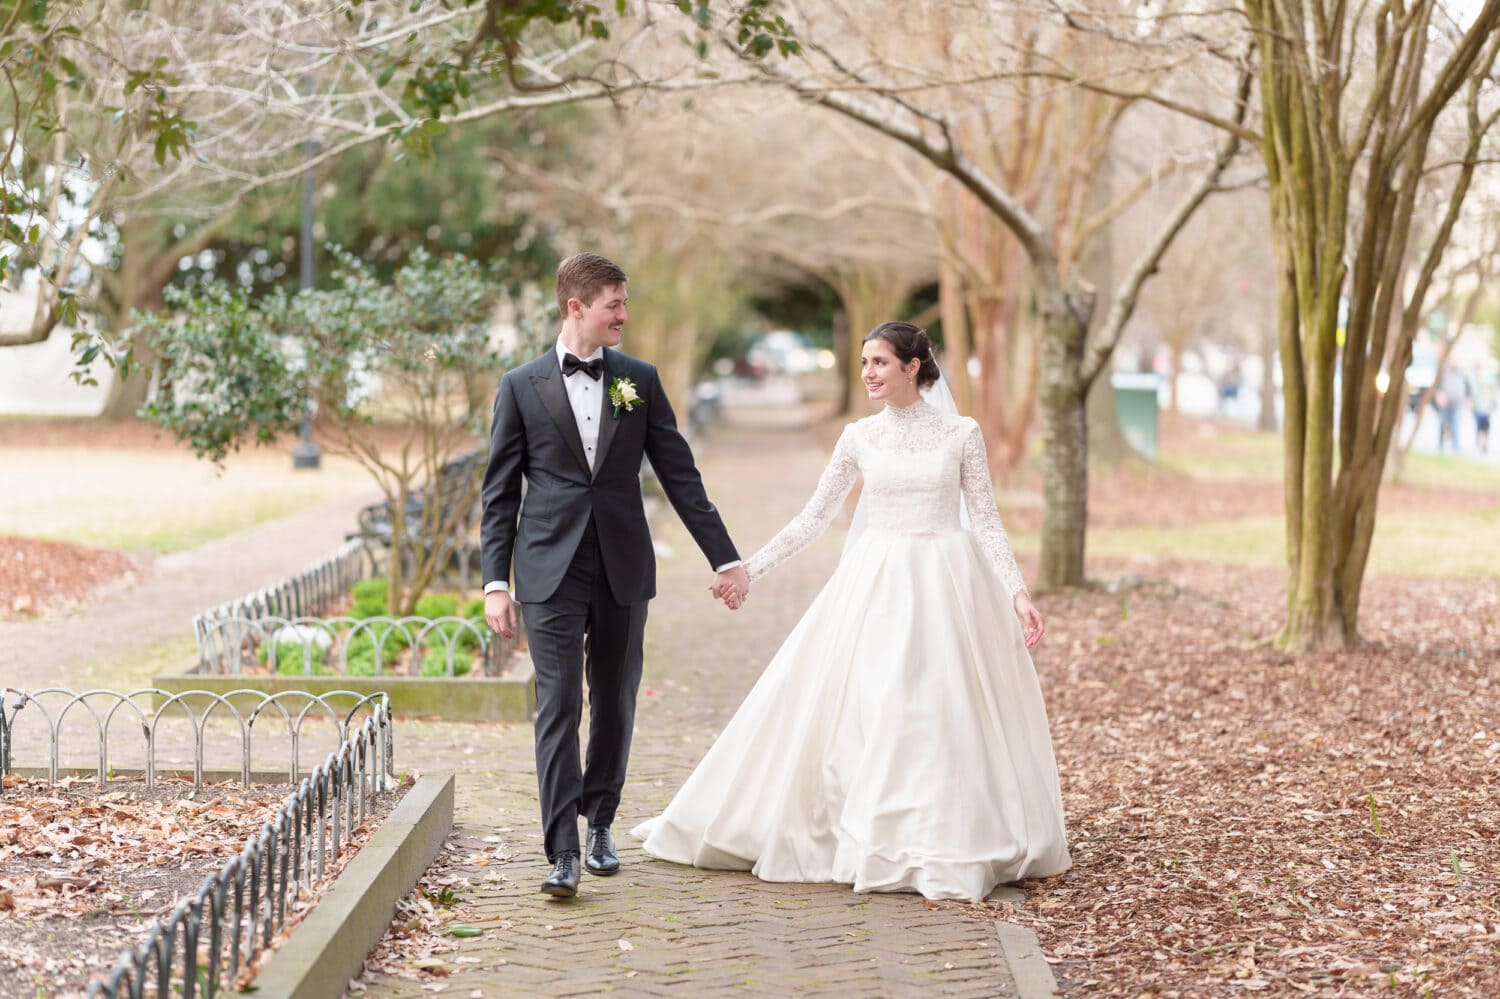 Holding hands walking down the path - Marion Square Charleston